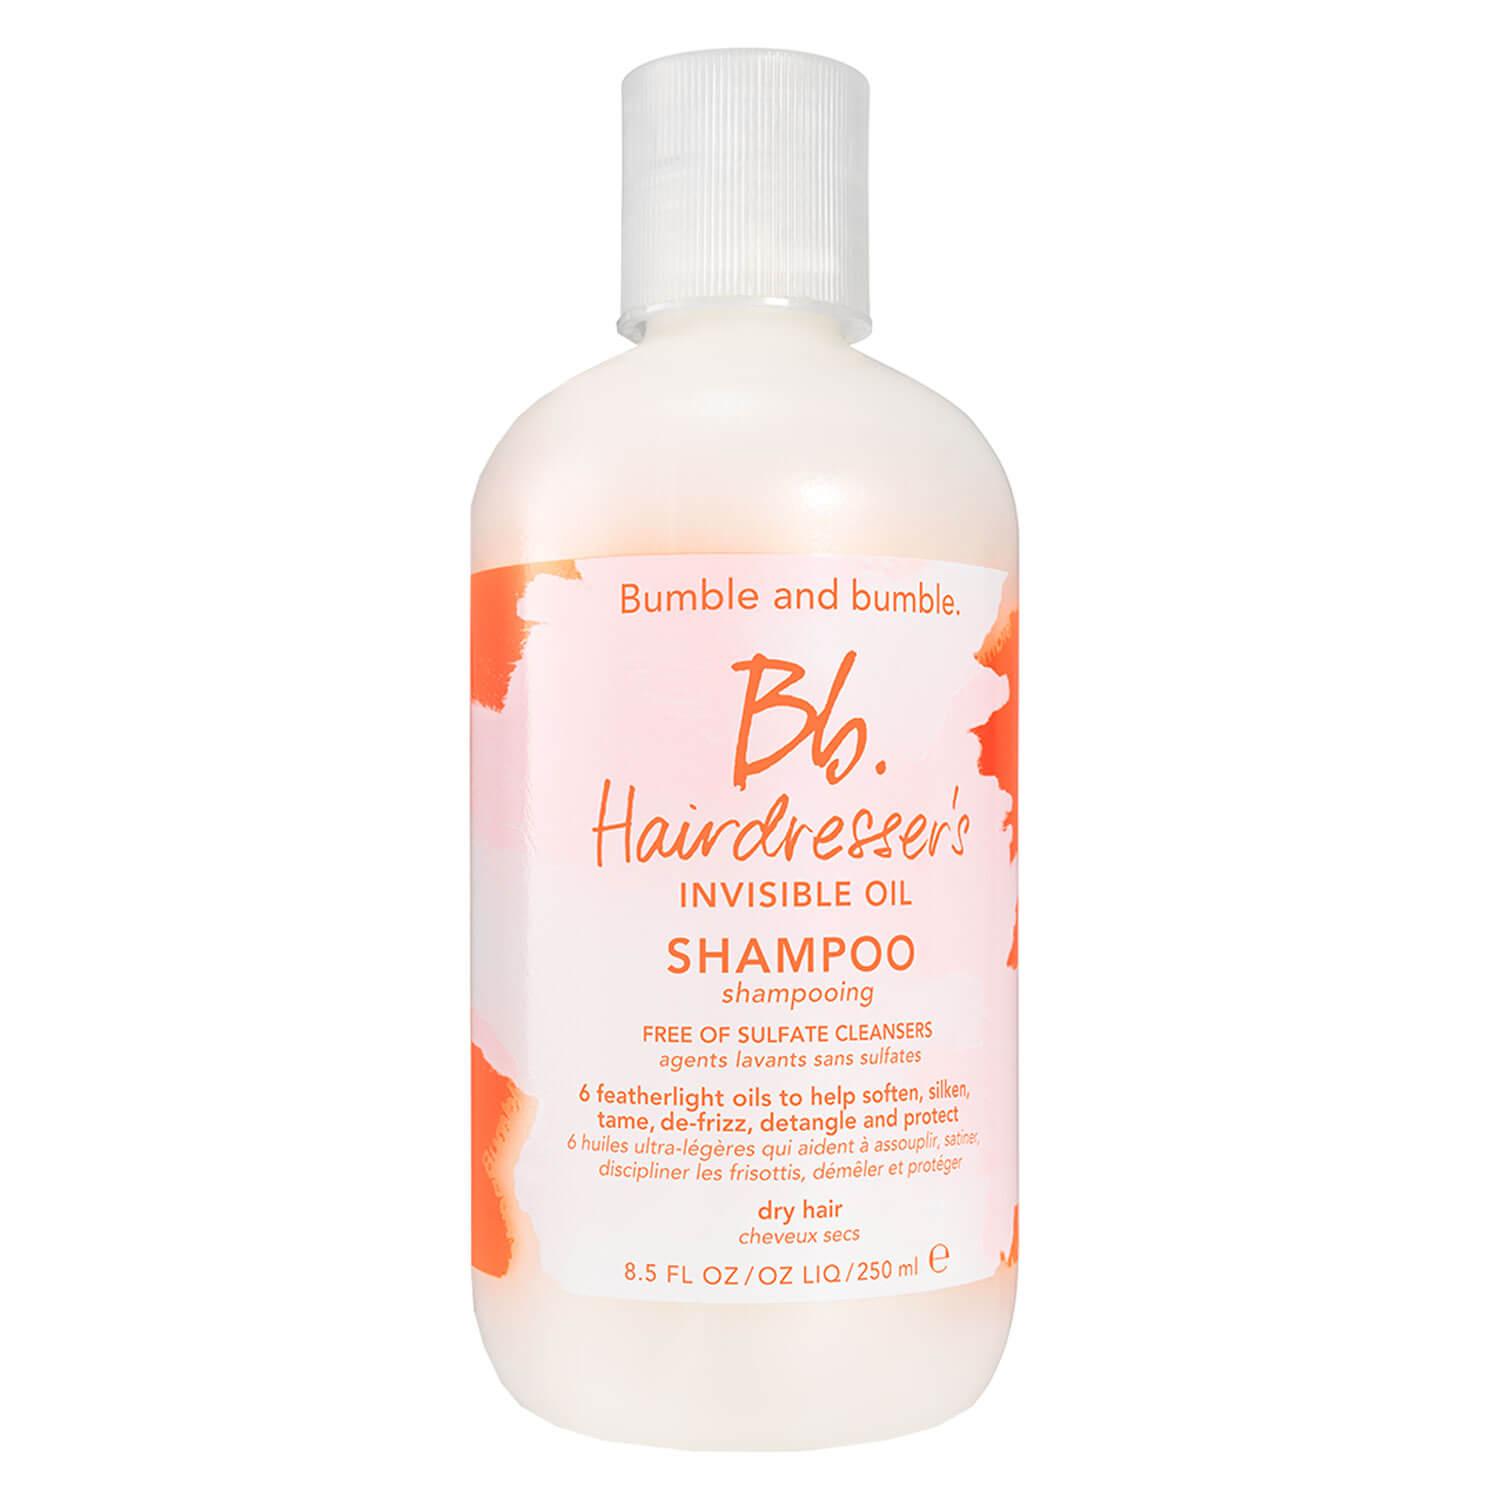 Bb. Hairdresser's Invisible Oil - Shampoo